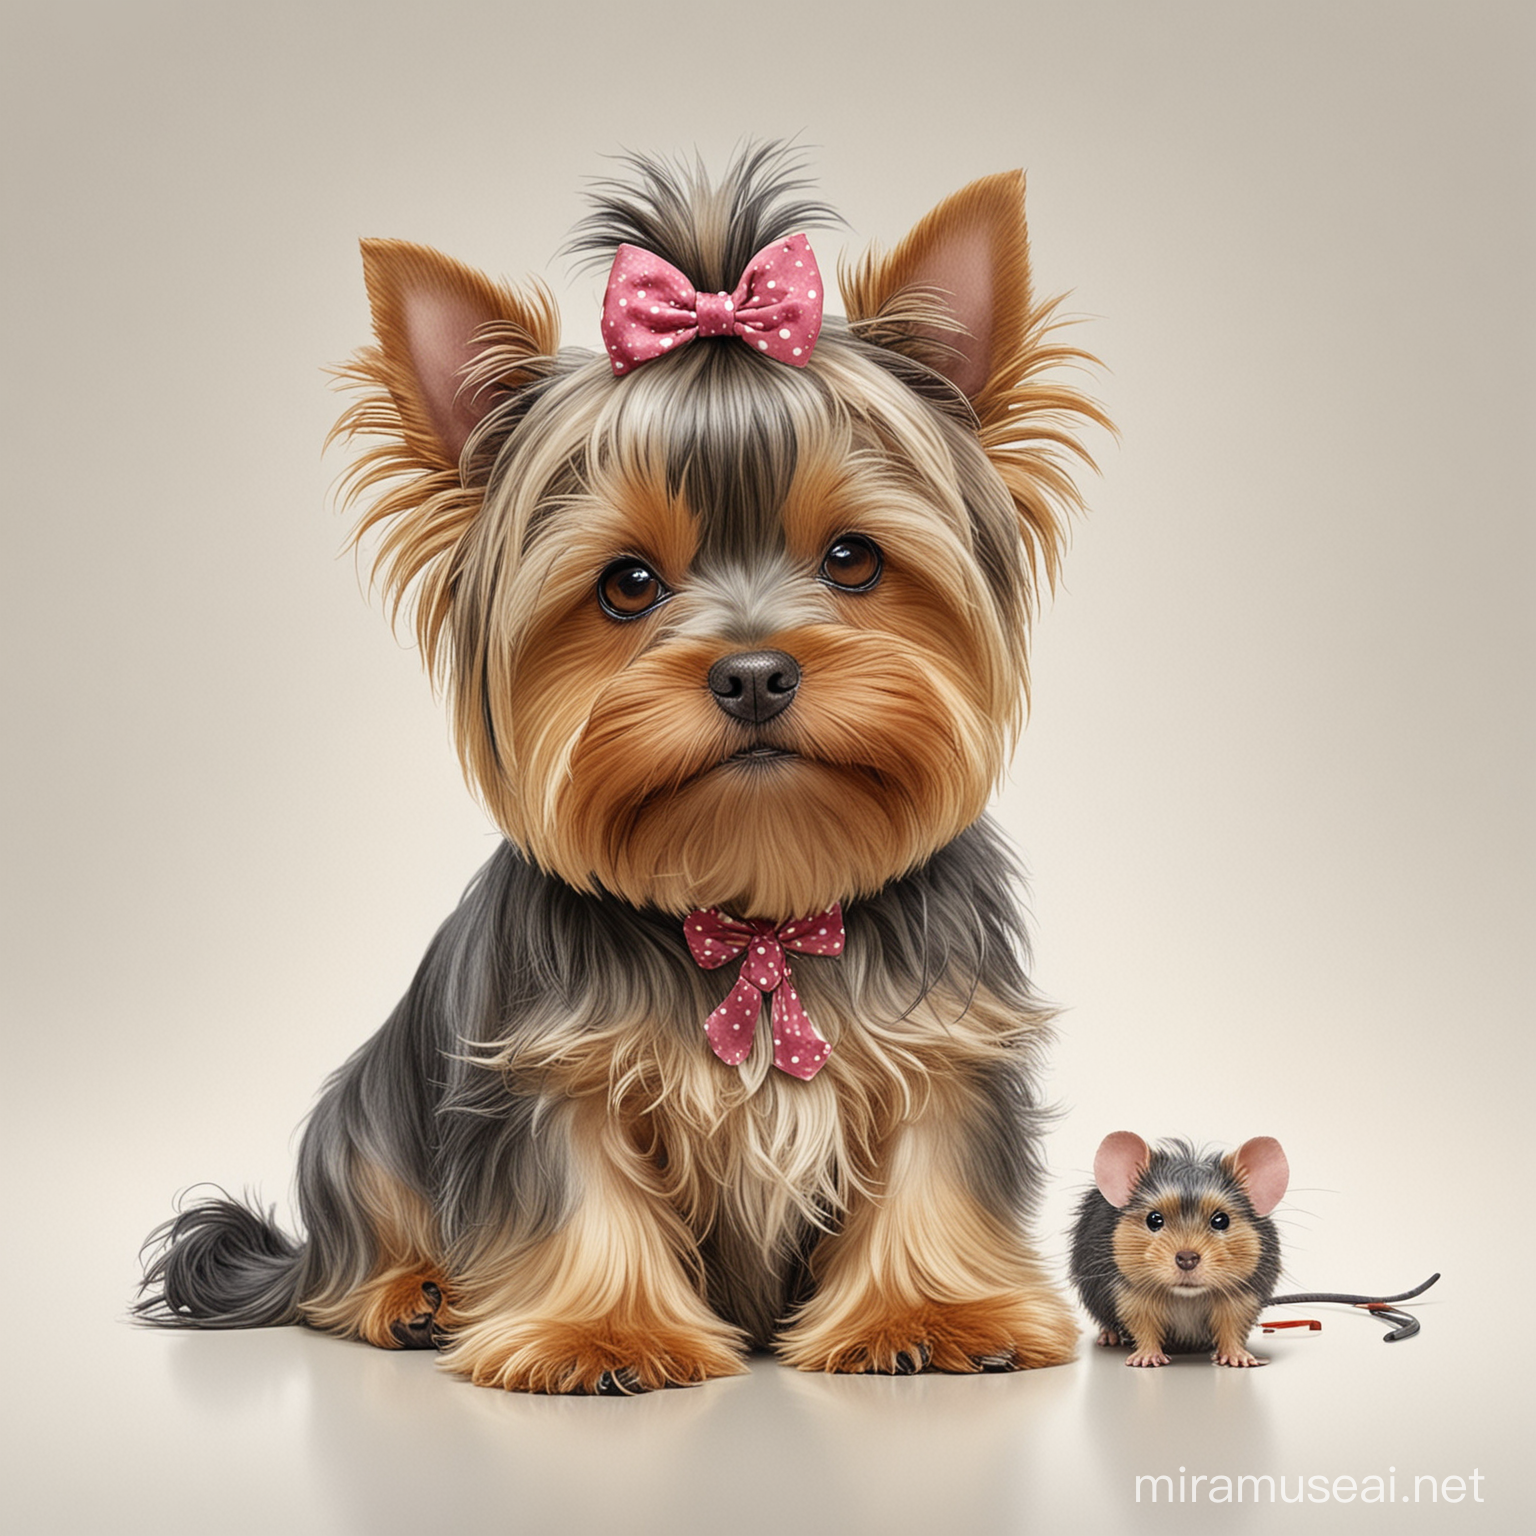 Adorable Yorkshire Terrier Cuddling with Little Mouse in Cartoonish Style